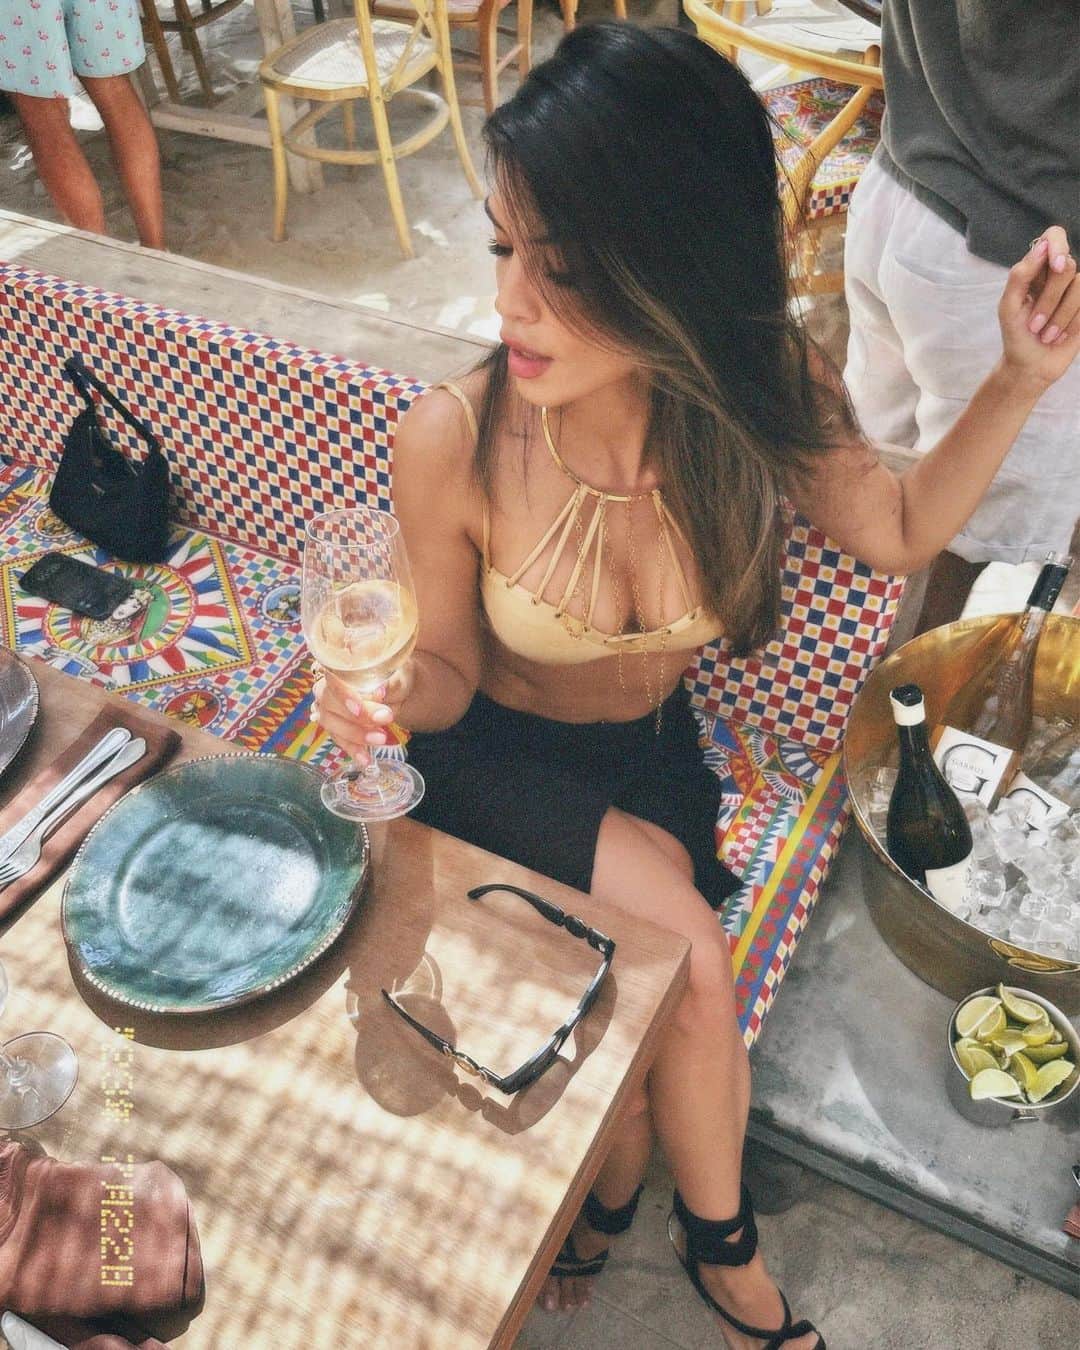 Alessandra Sironiのインスタグラム：「1. in St Tropez champagne tasted better 2. rent me, please 3. keep it french cool 4. 3 Café au lait 5. mas champagne por favor 6. SOF combi 7. très bien 8. not yet mine 9. au chocolat morning 10. hello there, who are you again?」